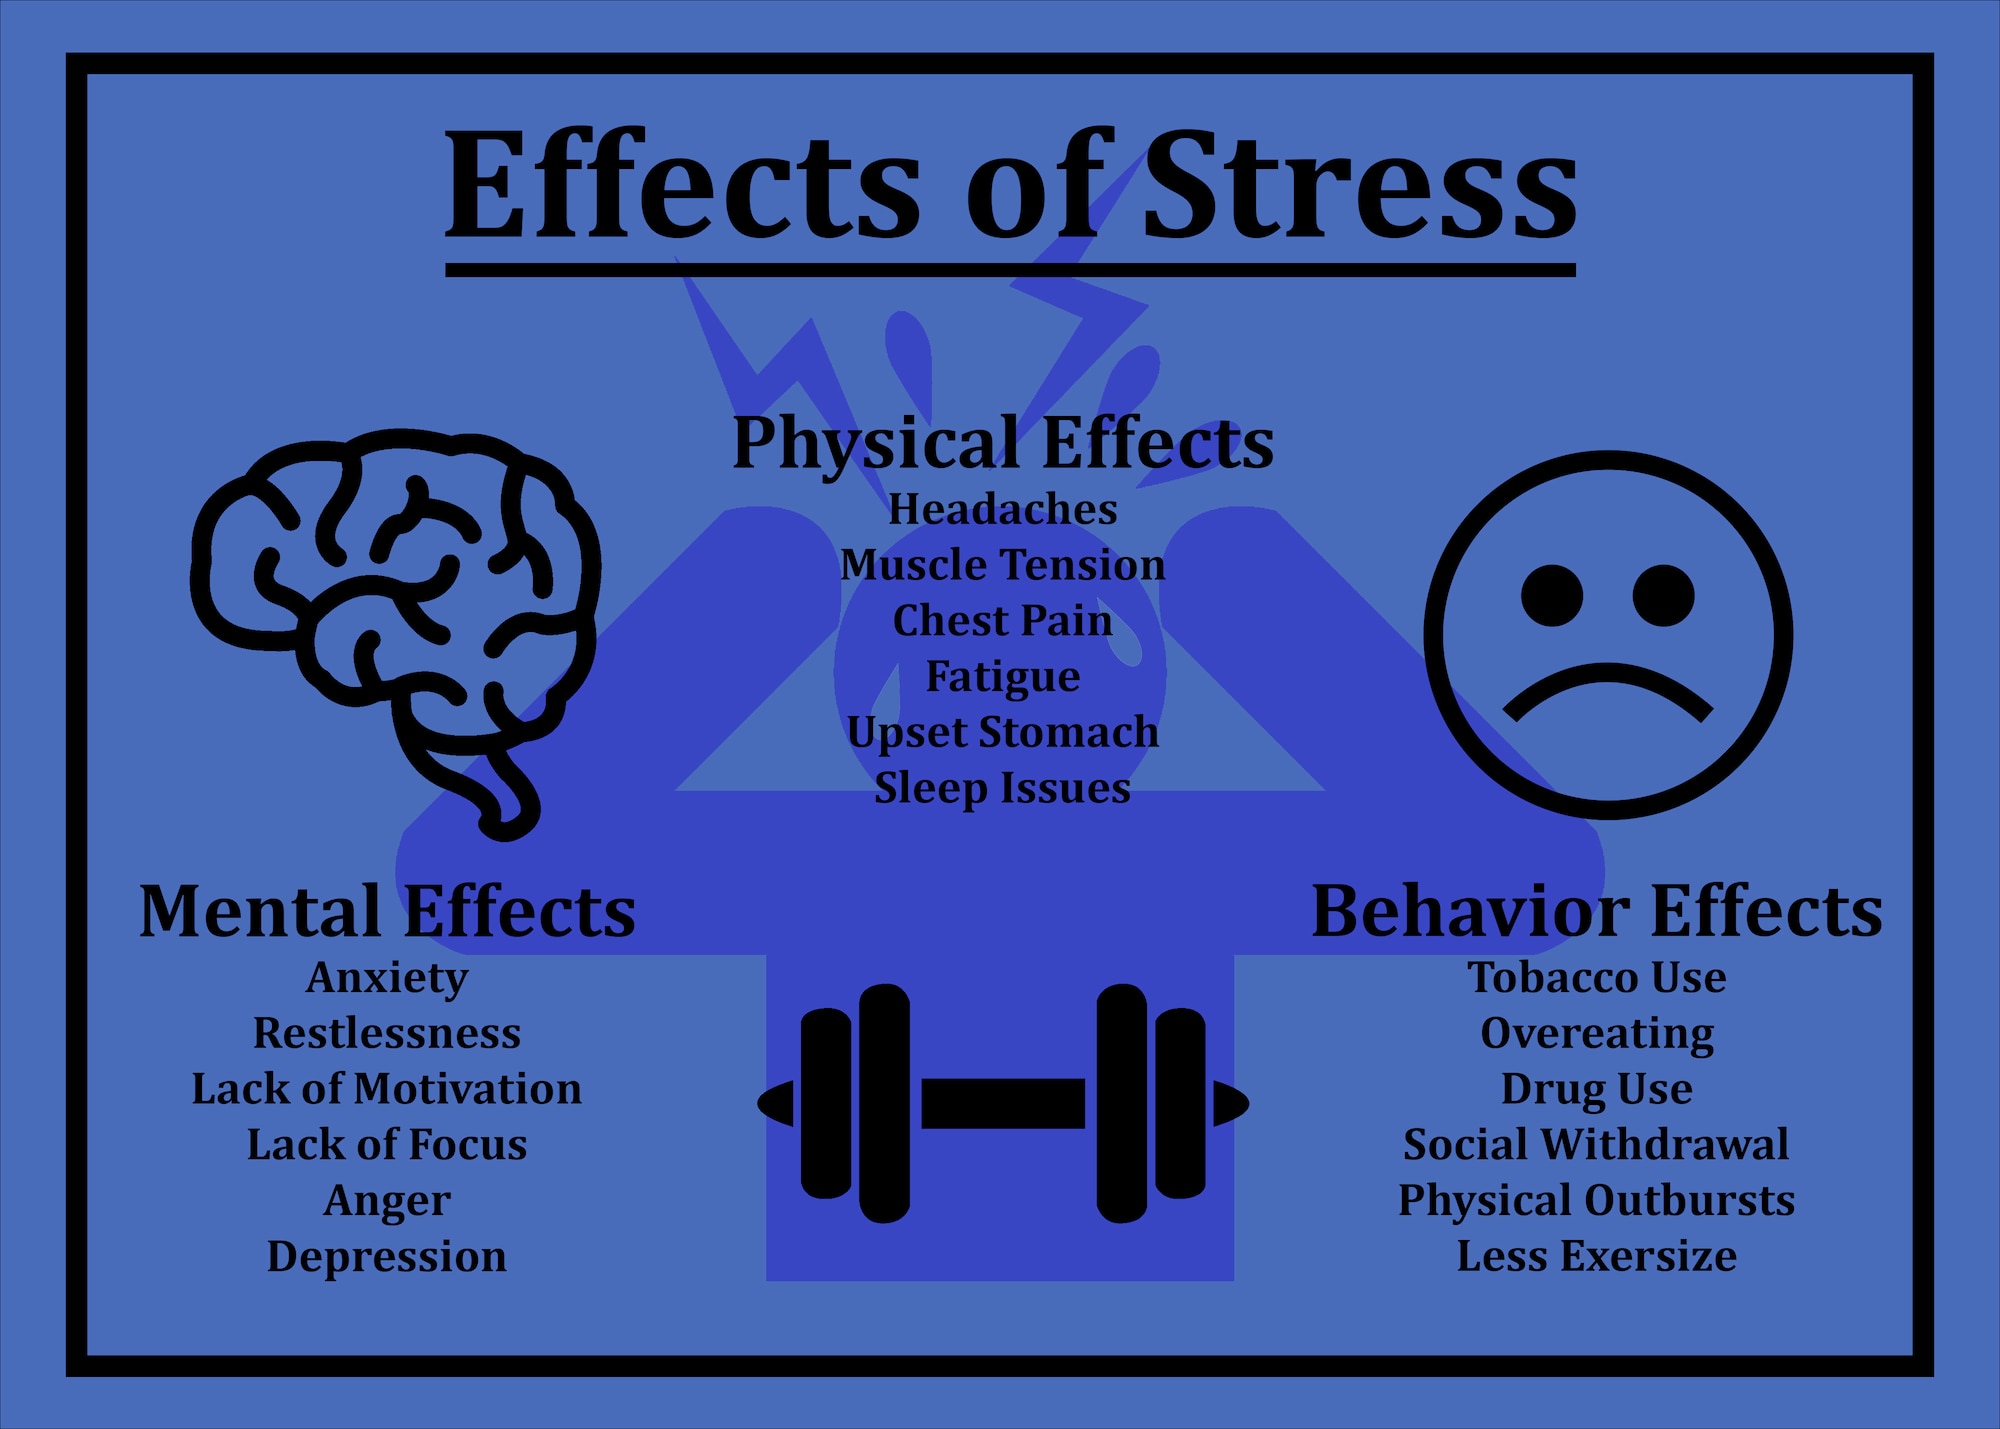 Effects of stress information graphic